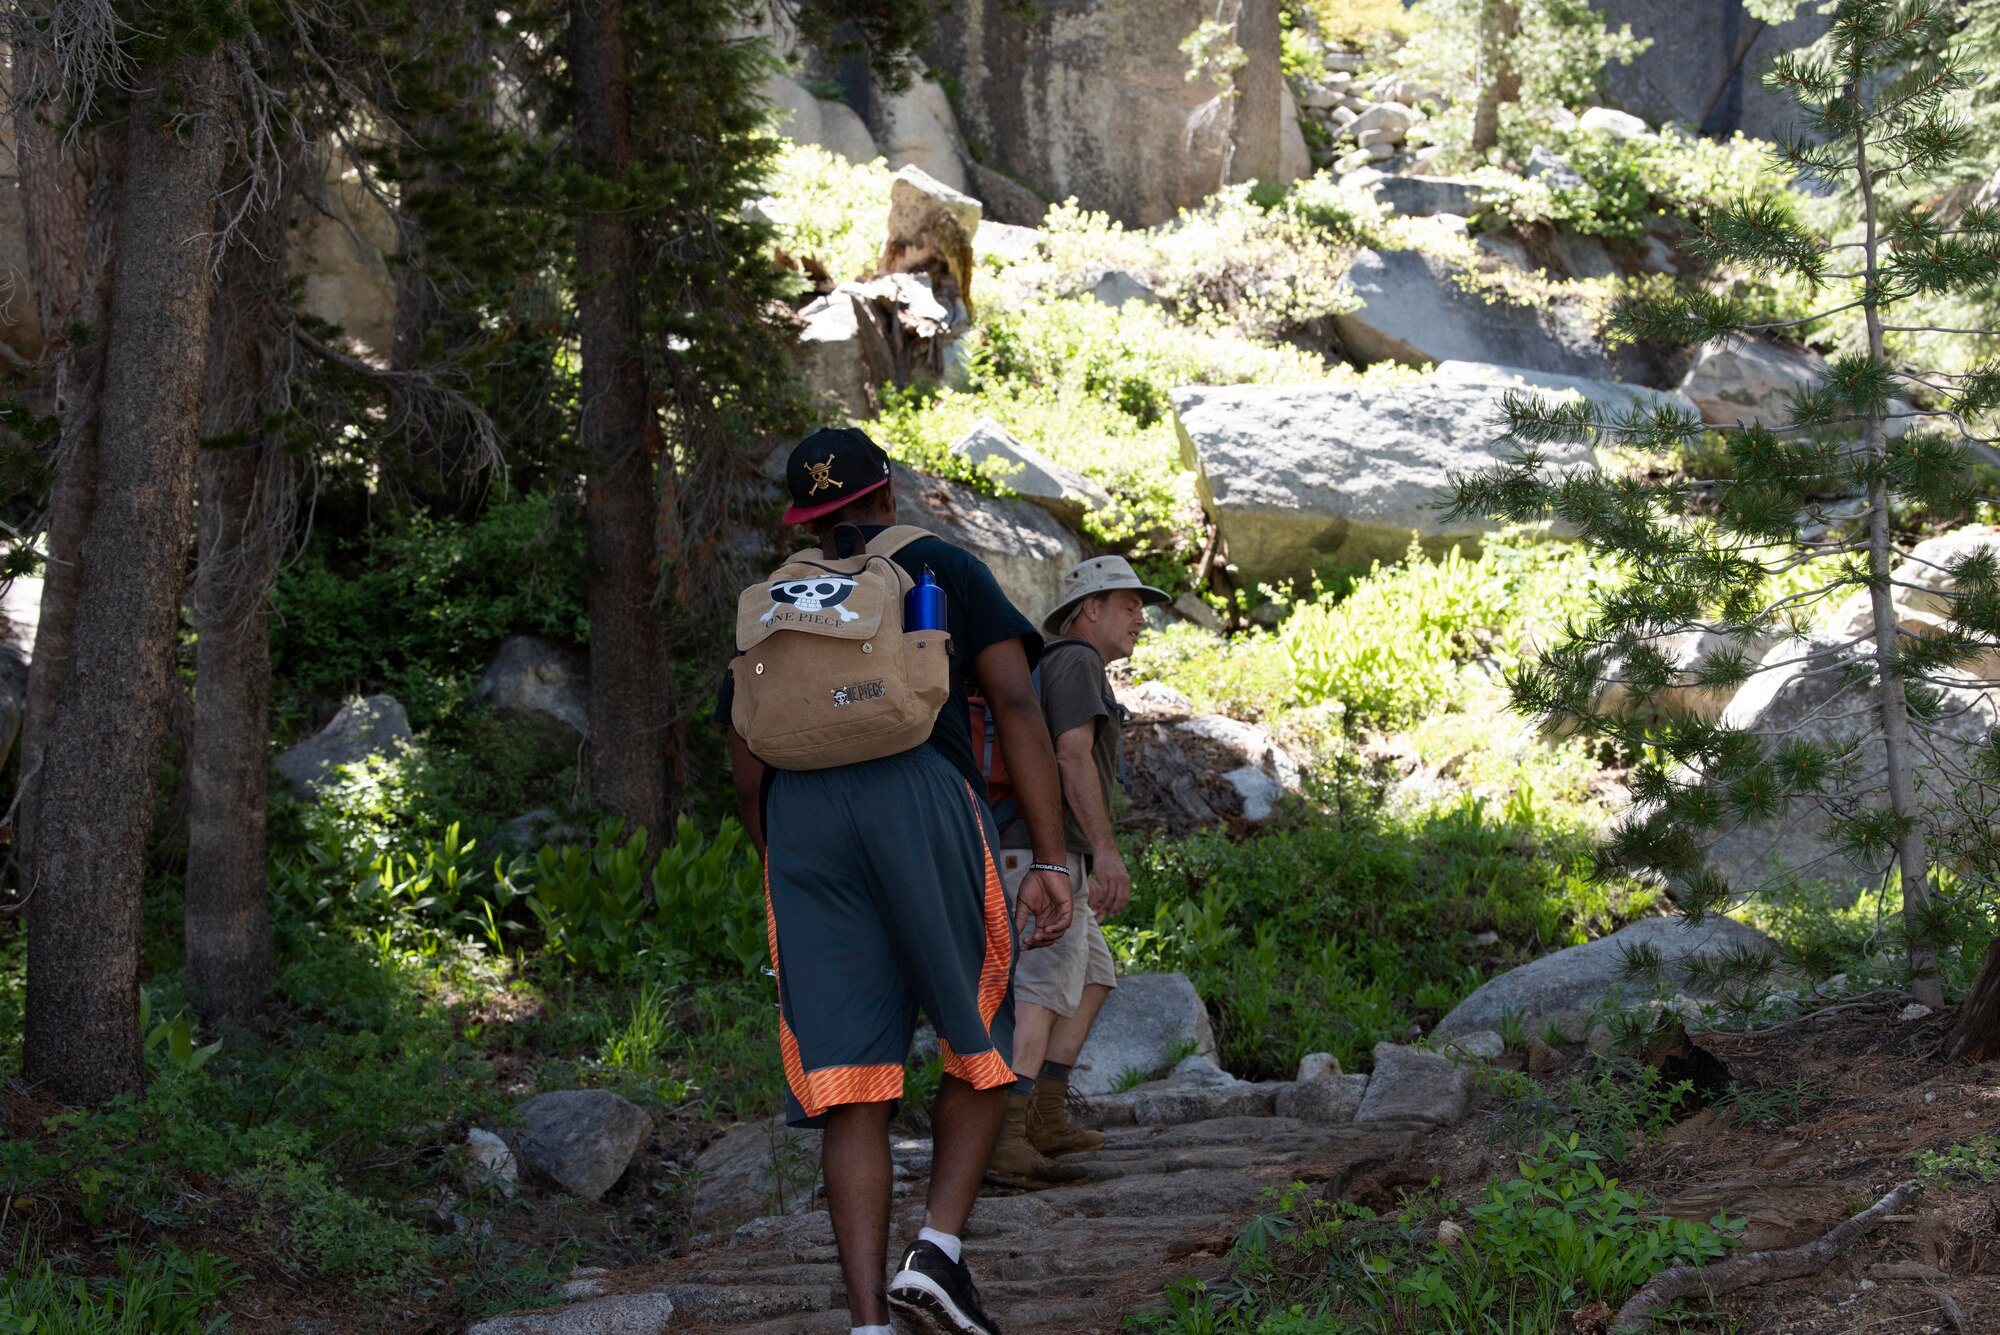 U.S. Air Force Capt. Ayodeji Alaketu, 60th Medical Operations Squadron family resident physician, hikes Cloud’s Rest July 13, 2019, at Yosemite National Park, California. Alaketu and 41 other Airmen from Travis Air Force Base, California, hiked to Cloud’s Rest covering 14.57 miles as they climbed to 9,926 feet above sea level. The hike was organized to enhance the Airmen’s physical, mental and spiritual resiliency. (U.S. Air Fore photo by Tech. Sgt. James Hodgman)